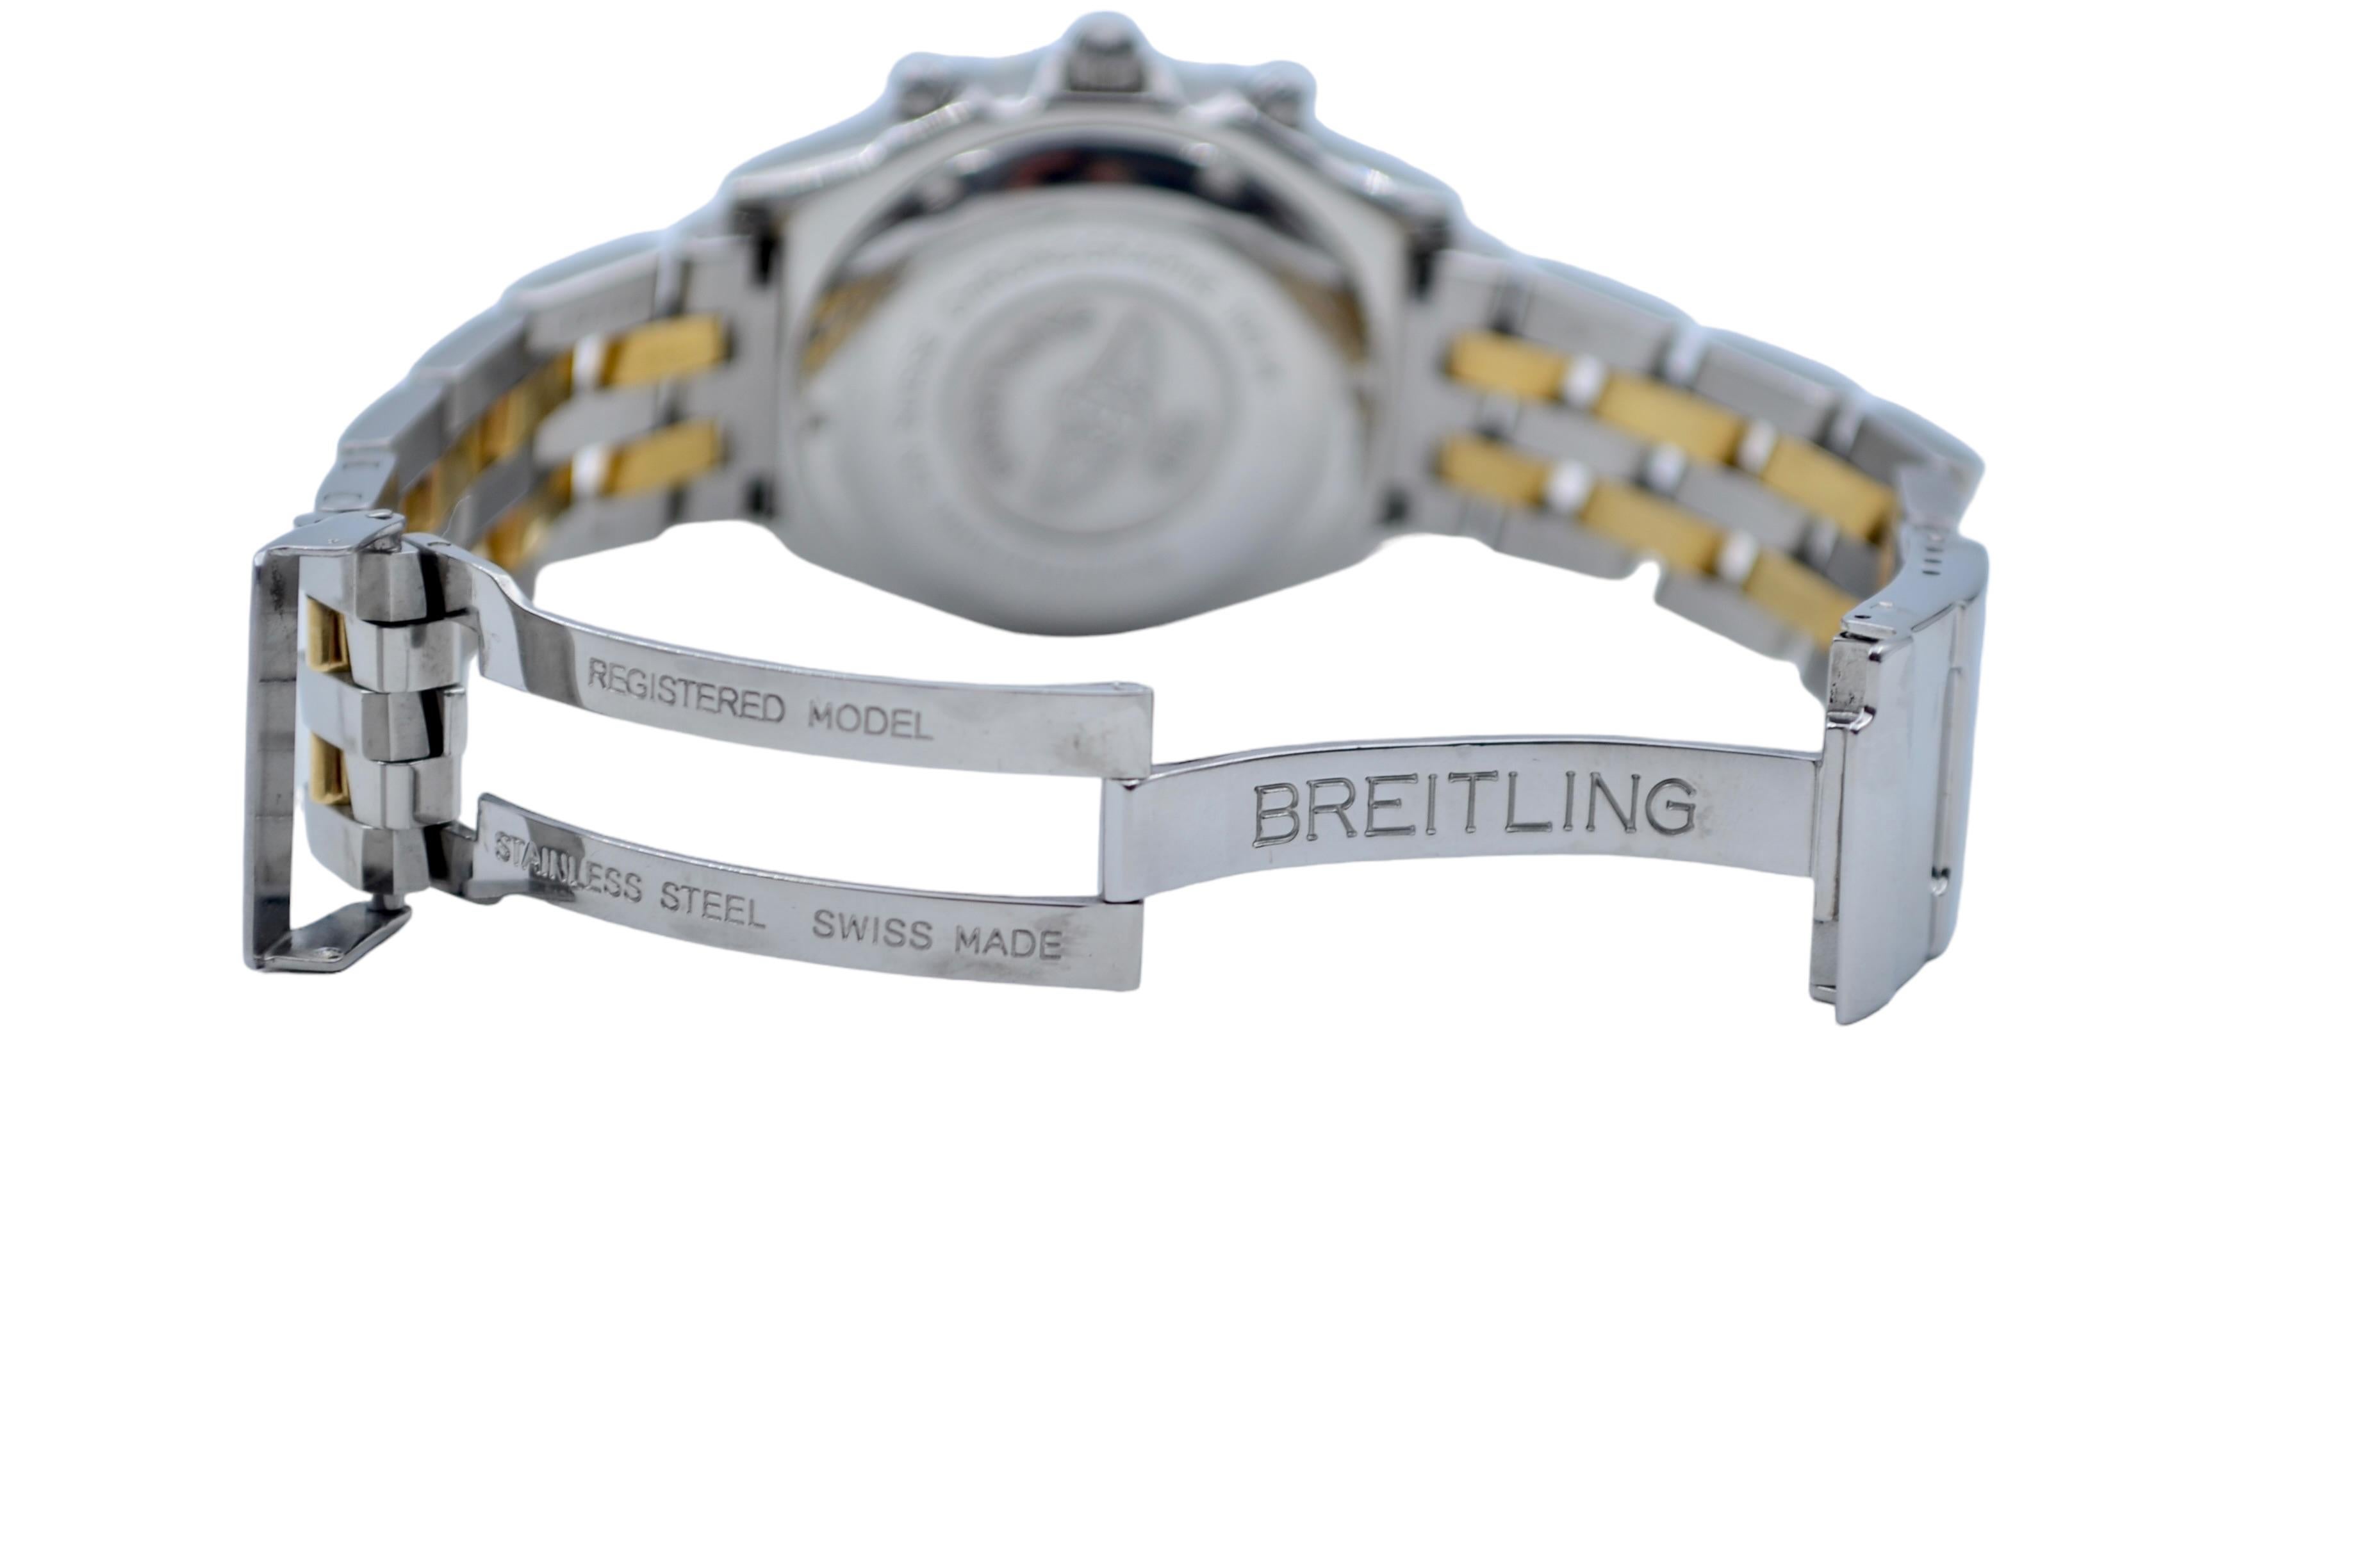 Breitling Chronomat Chronograph 39mm Gold&Steel Automatic Ref: D13050.1 3